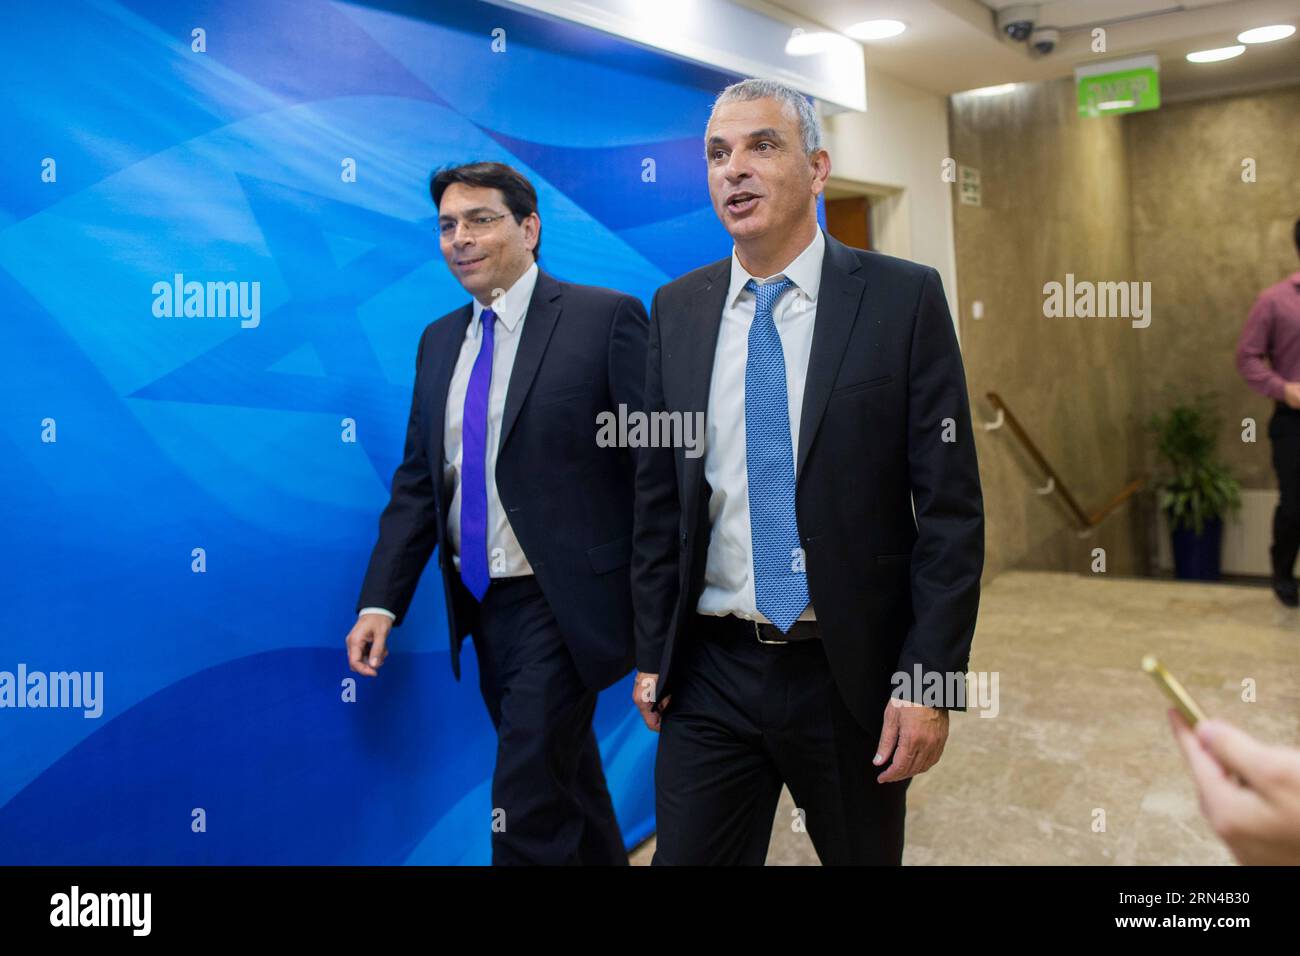 (150515) -- JERUSALEM, May 15, 2015 -- Incoming Israeli Finance Minister Moshe Kahlon (R) arrives for the first cabinet meeting of the Israel s 34th government at the Prime Minister s office in Jerusalem, on May 15, 2015. Israeli Prime Minister Benjamin Netanyahu s right-wing new coalition government was sworn in late Thursday night, after the parliament approved it by a razor-thin 61-59 majority. /Yonatan Sindel) MIDEAST-JERUSALEM-ISRAEL-34TH GOV T-FIRST CABINET MEETING JINI PUBLICATIONxNOTxINxCHN   Jerusalem May 15 2015 Incoming Israeli Finance Ministers Moshe Kahlon r arrives for The First Stock Photo